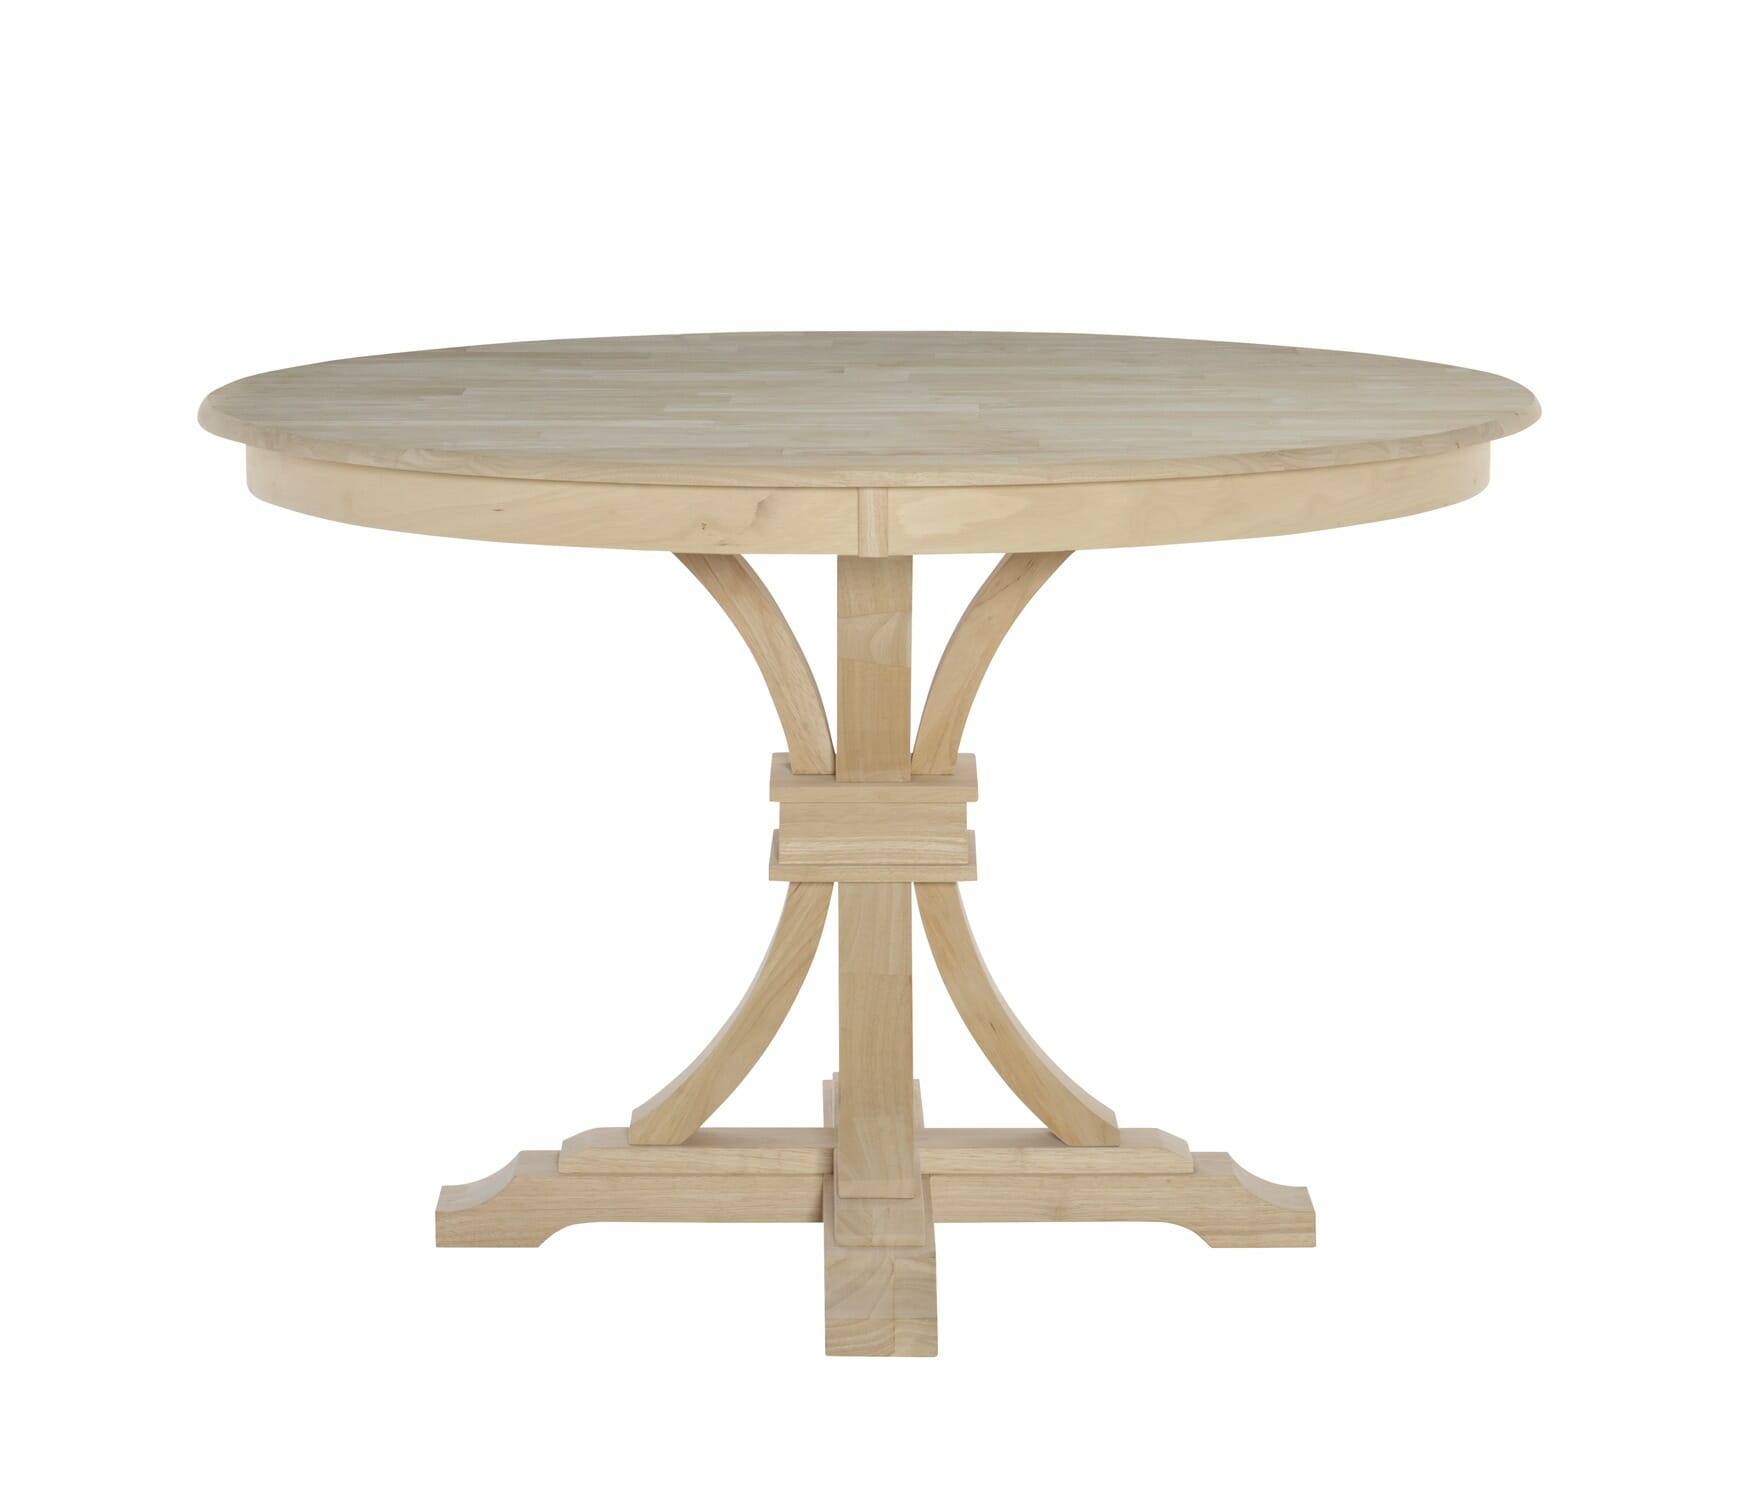 Unfinished Furniture Of Wilmington, 48 Round Solid Wood Table Top